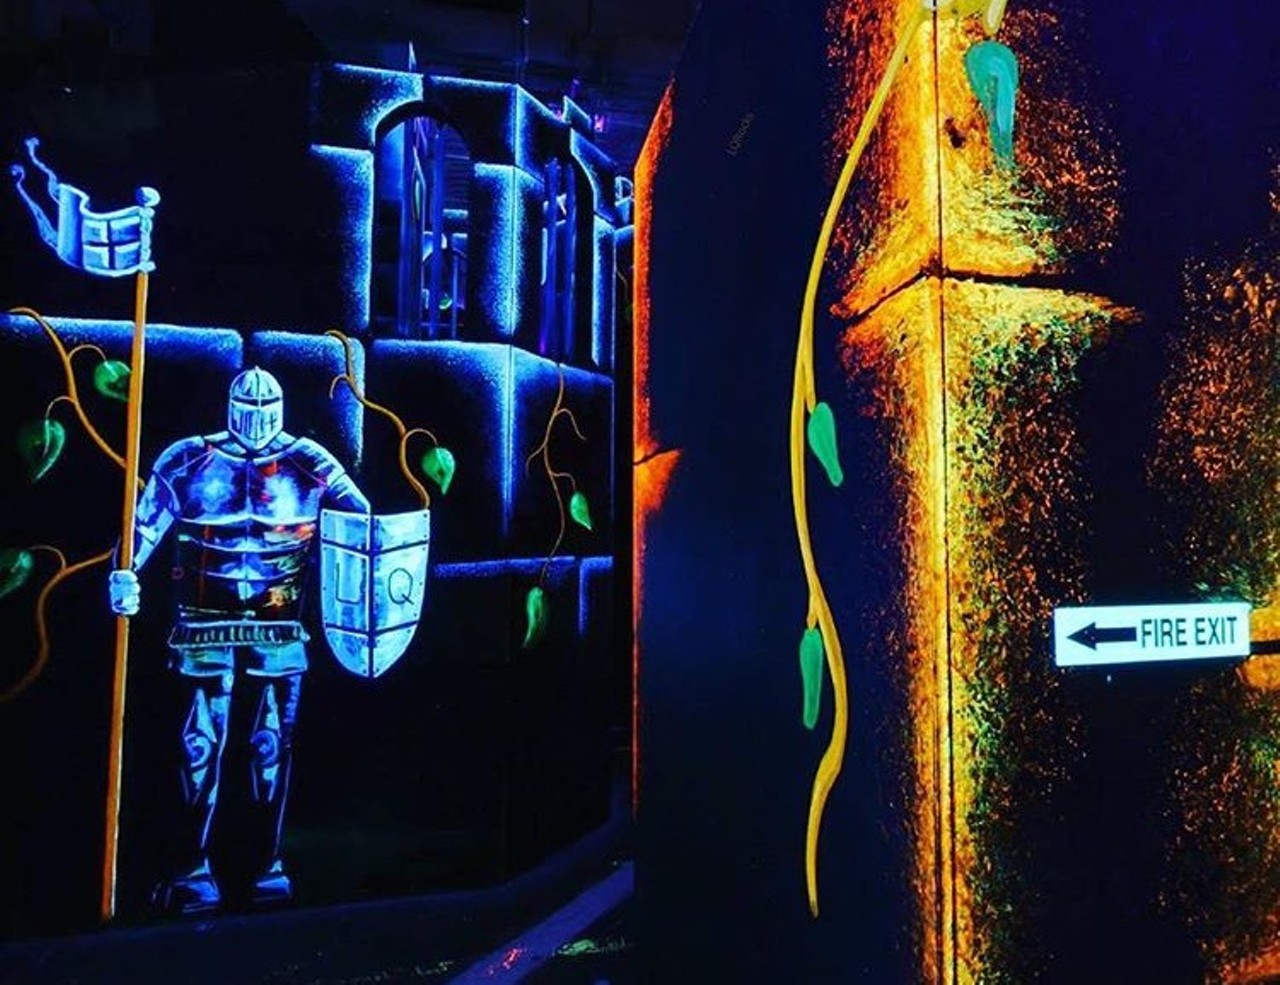 Laser Quest
Multiple locations, https://www.laserquest.com/
Laser Quest combines hide-and-seek with a lasers guns and obstacle courses to bring the modern take on tag to families looking for air conditioned fun. 
Photo via Instagram / laserquest